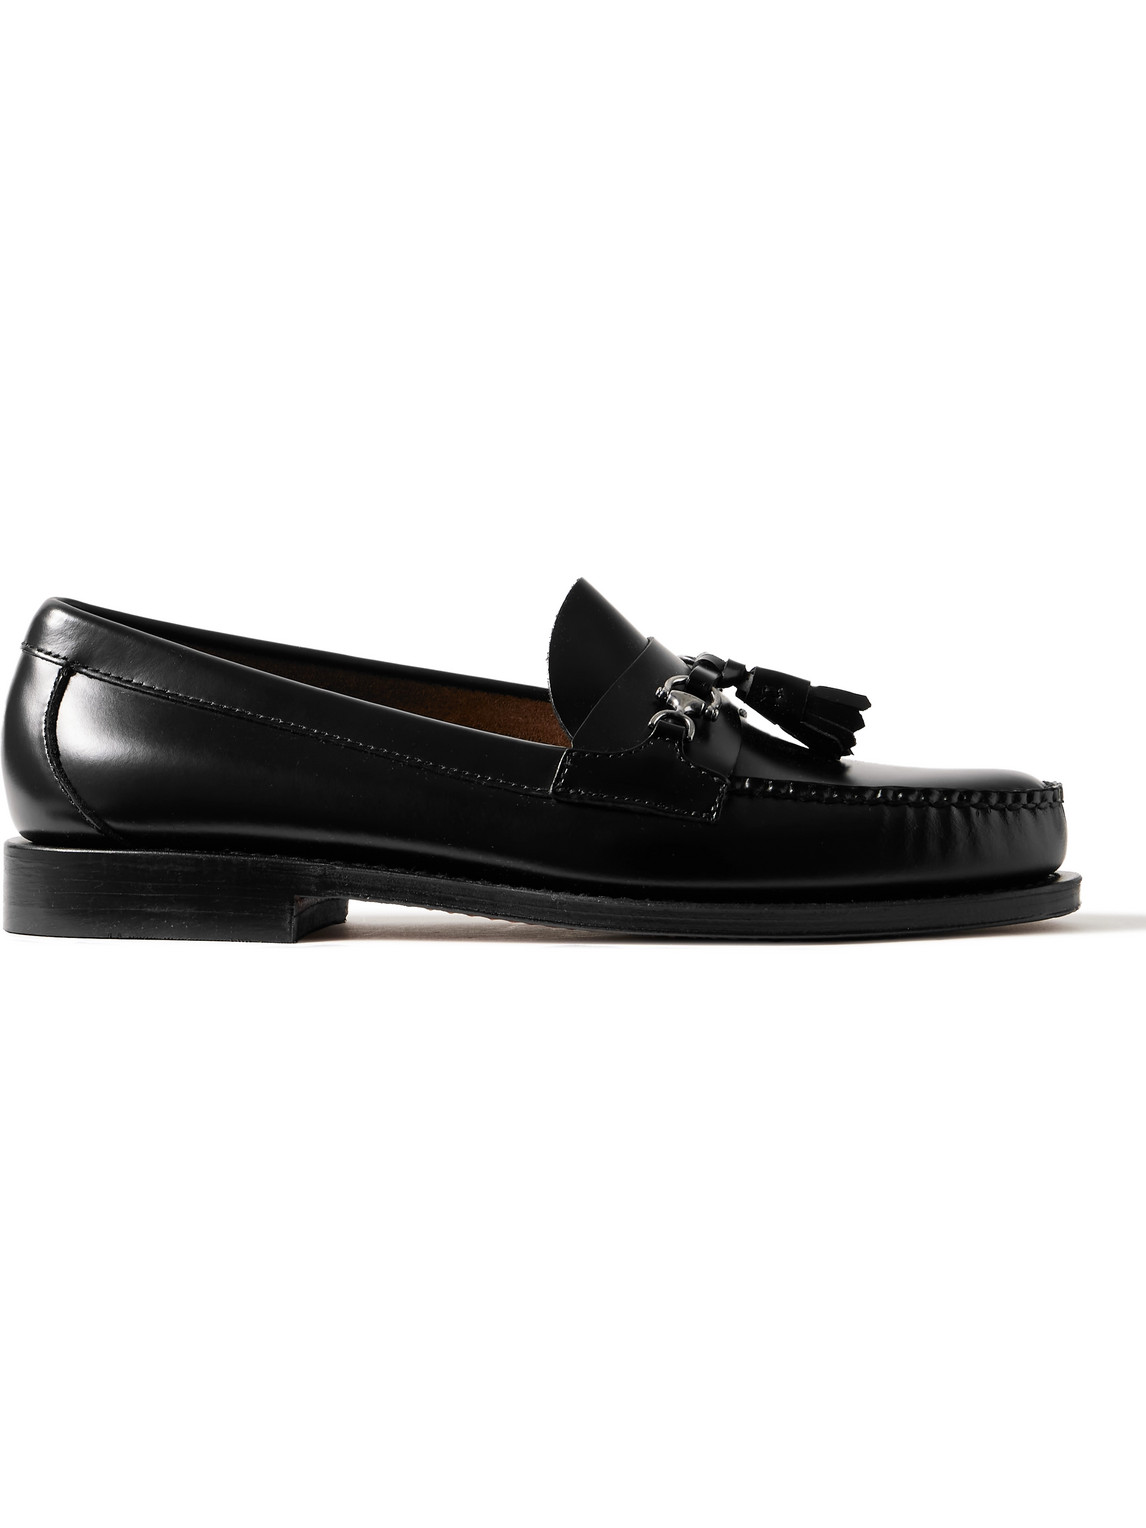 G.h. Bass & Co. Weejun Heritage Larson Leather Loafers In Black